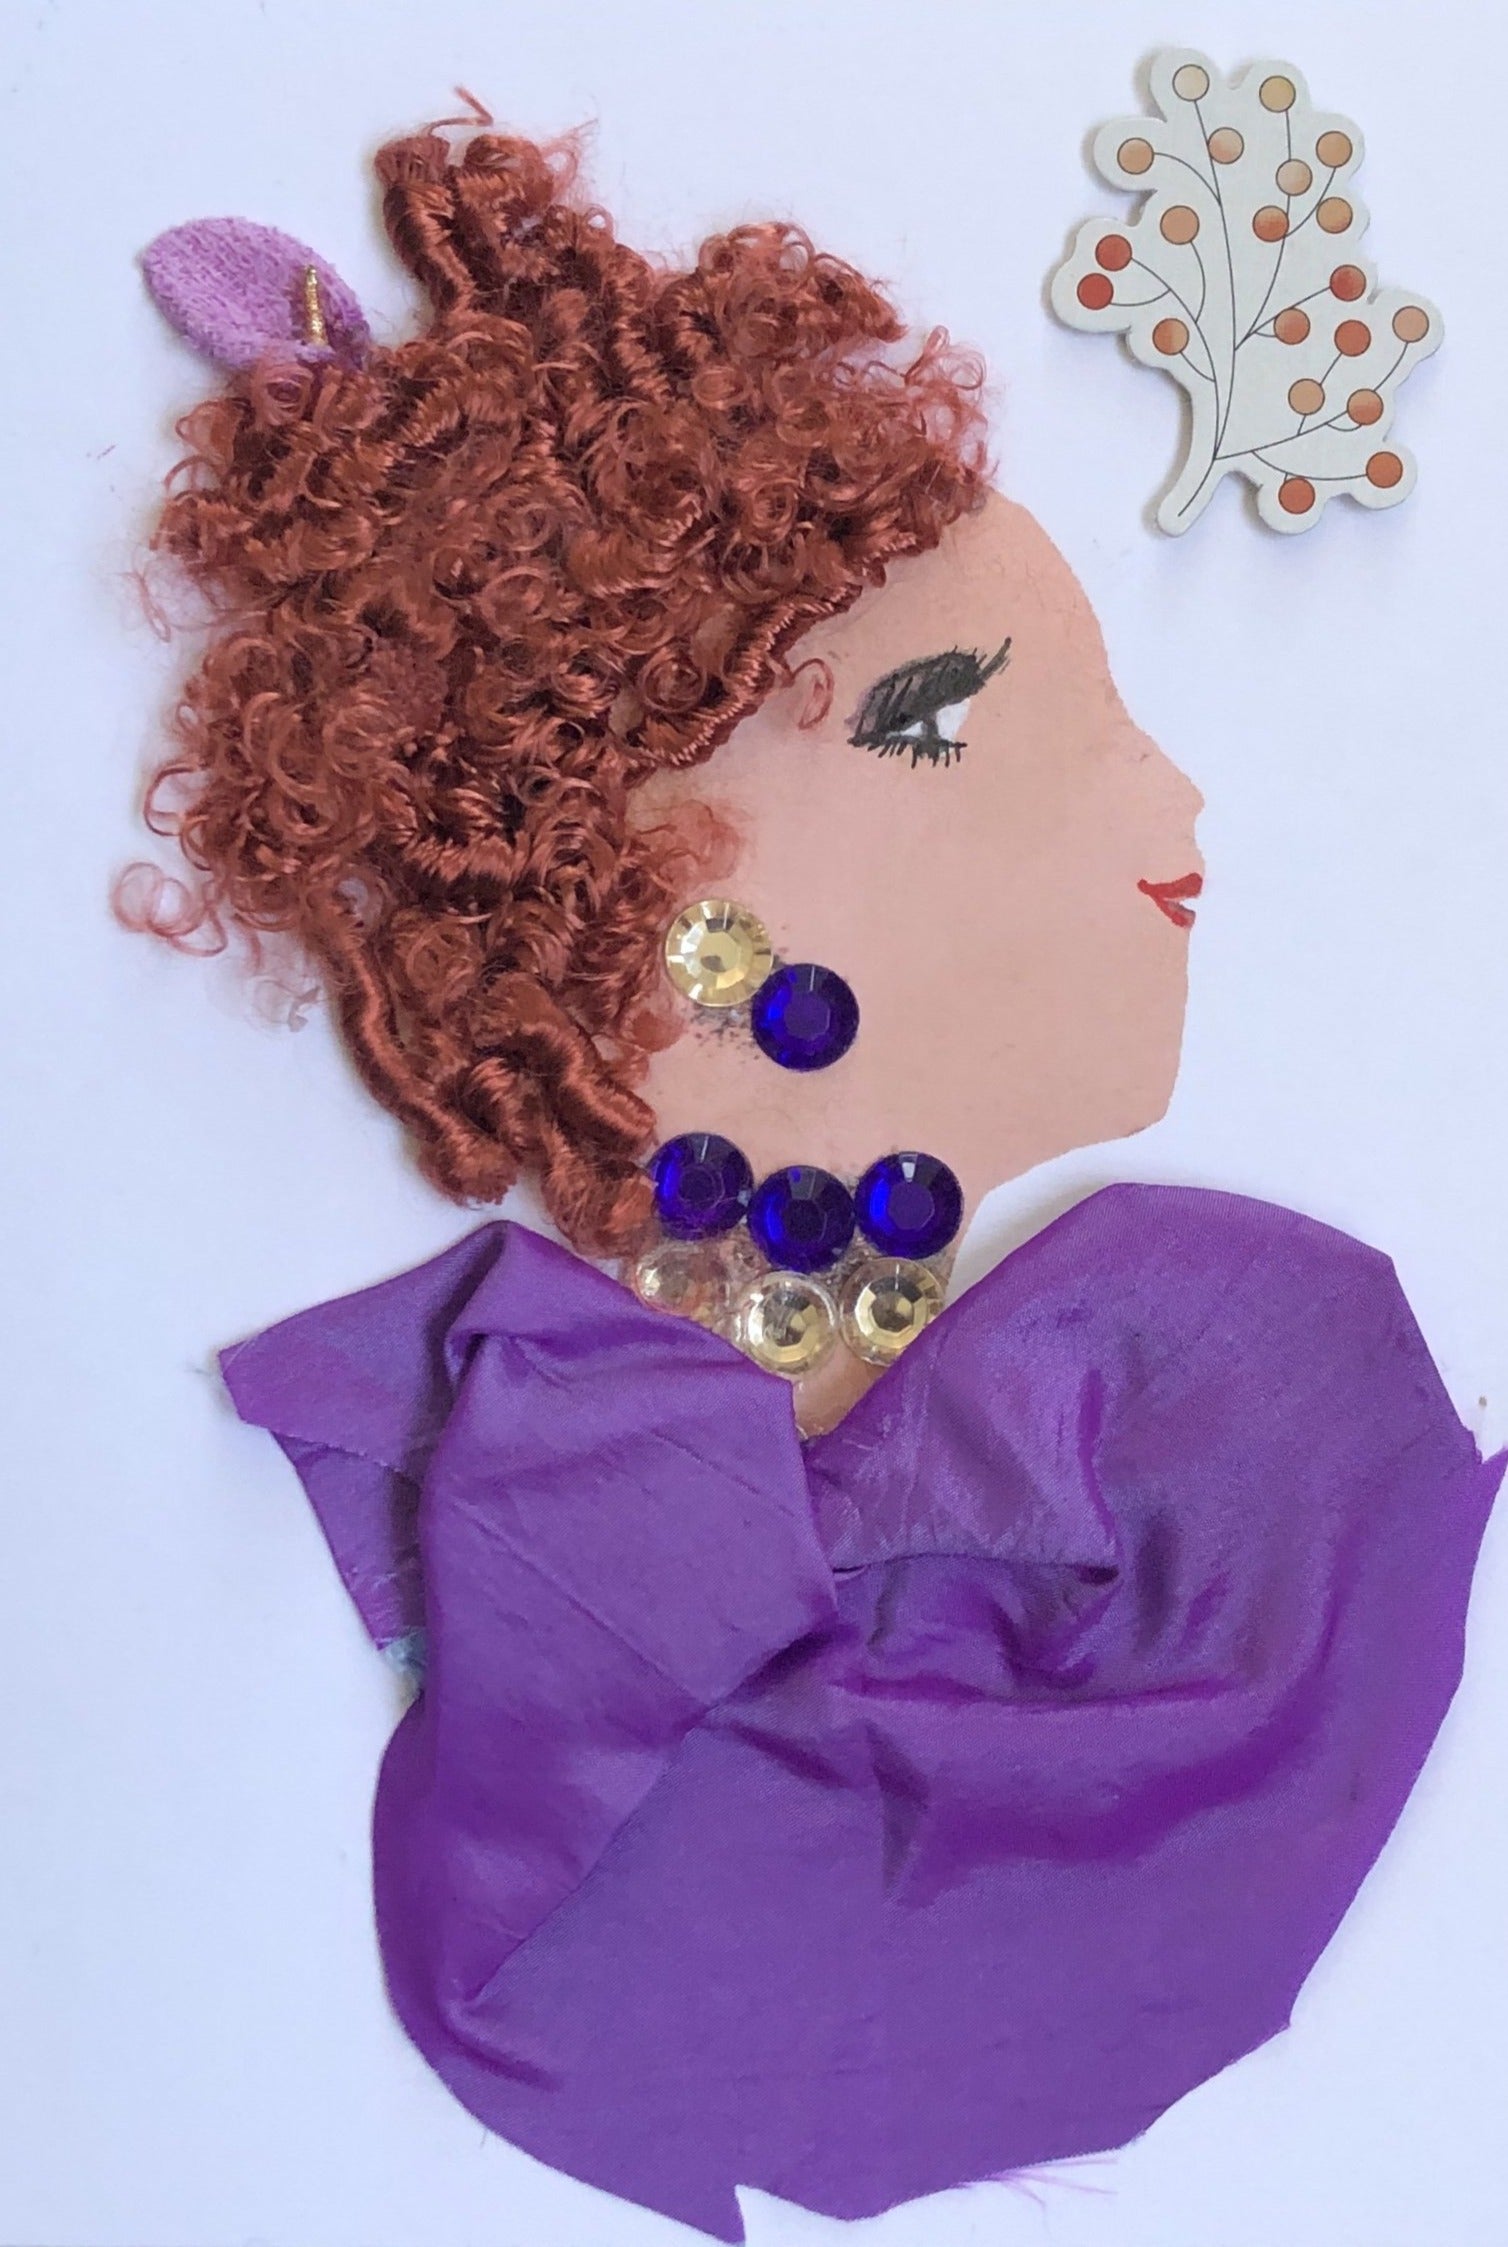 This card is called Perivale. She wears a purple silk blouse, and her hair is bright red and curly. Her jewellery is purple and tan coloured gems. In the righthand corner there is a small sticker of a pink plant. 